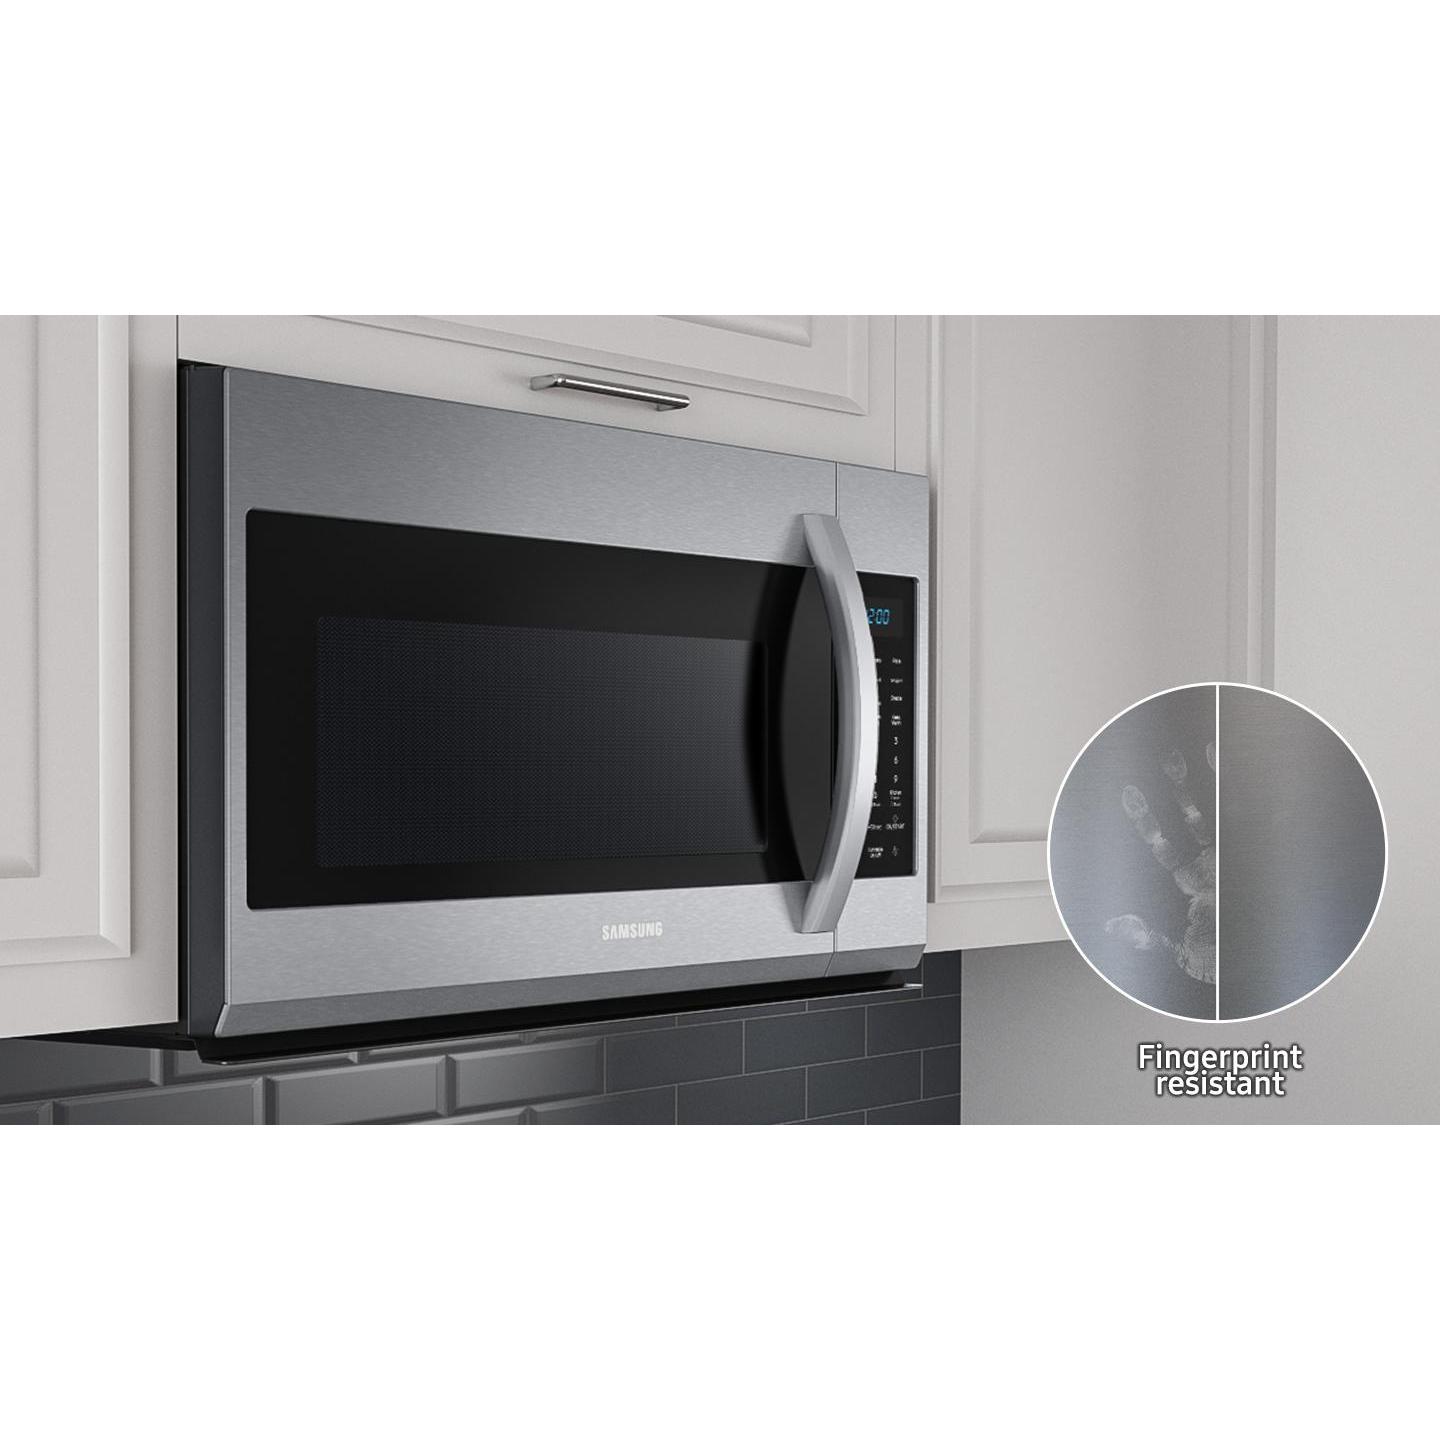 Samsung 30-inch, 1.7 cu.ft. Over-the-Range Microwave Oven with LED Display ME17R7021ES/AA